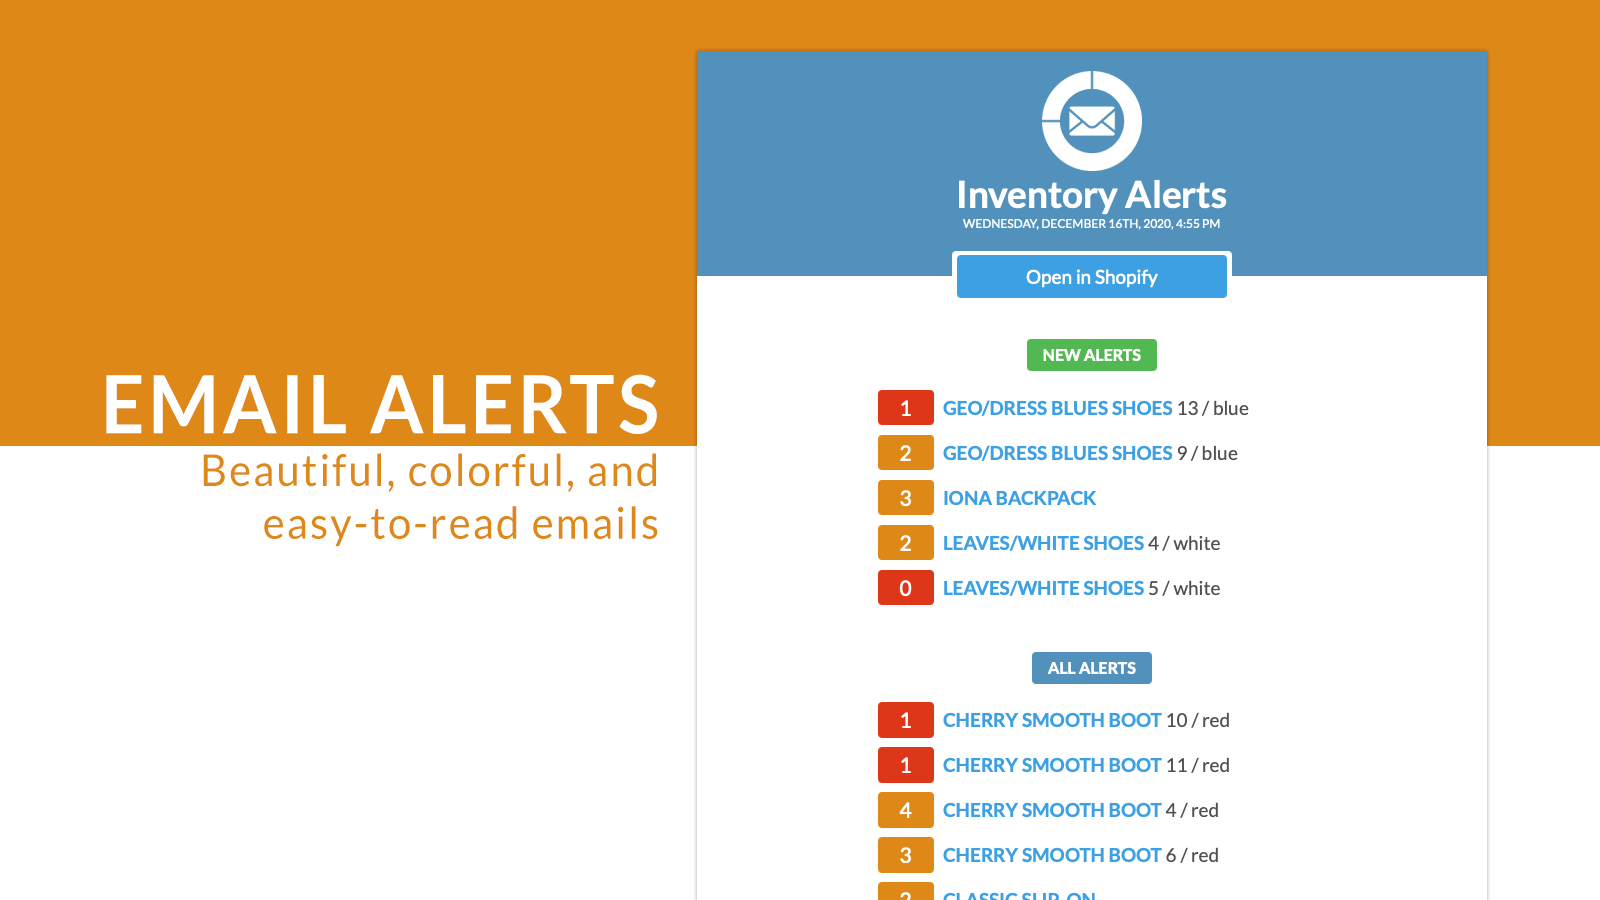 Beautiful, colorful, easy-to-read email alerts.